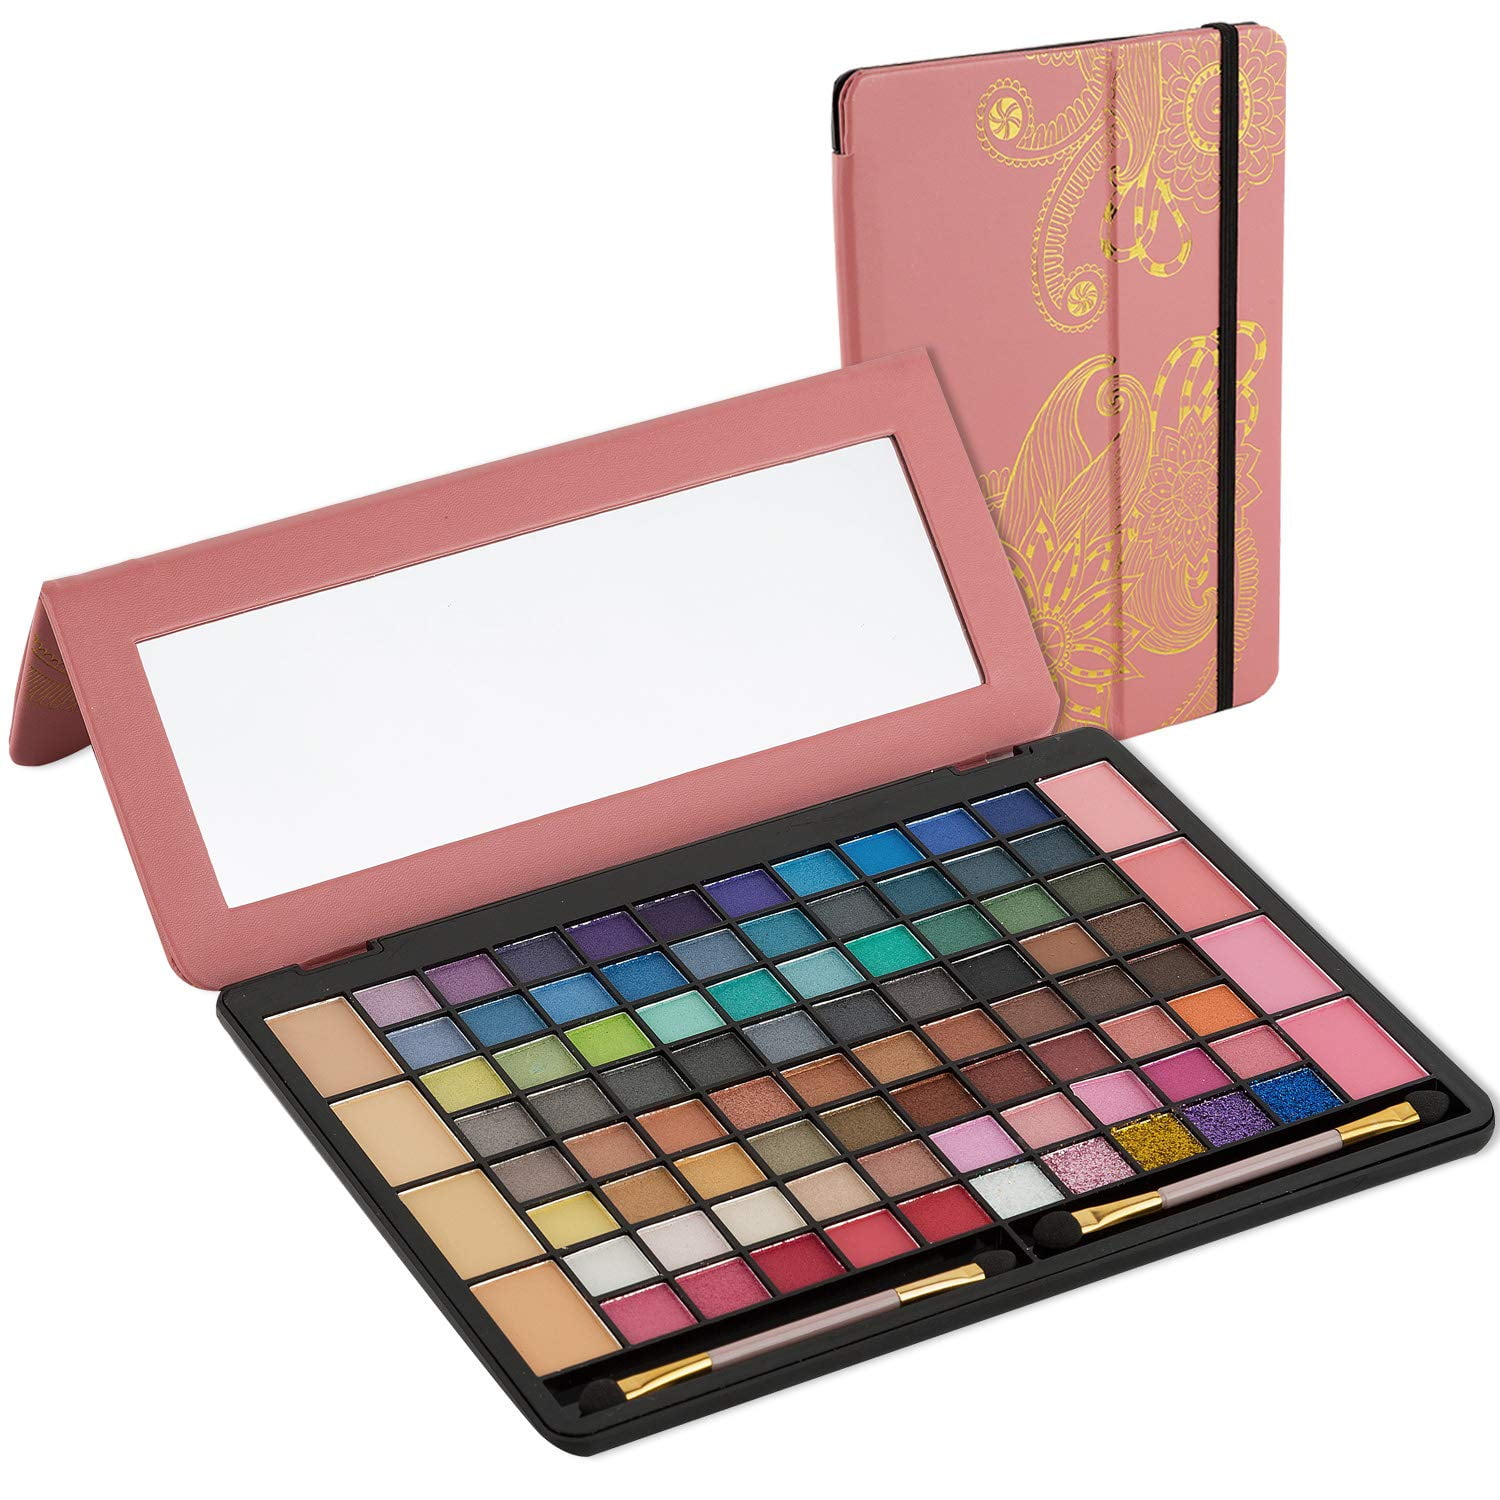 Case Folds up DRESS 2 PLAY Pretend Makeup Palette Set with 43 Shades and Colors 